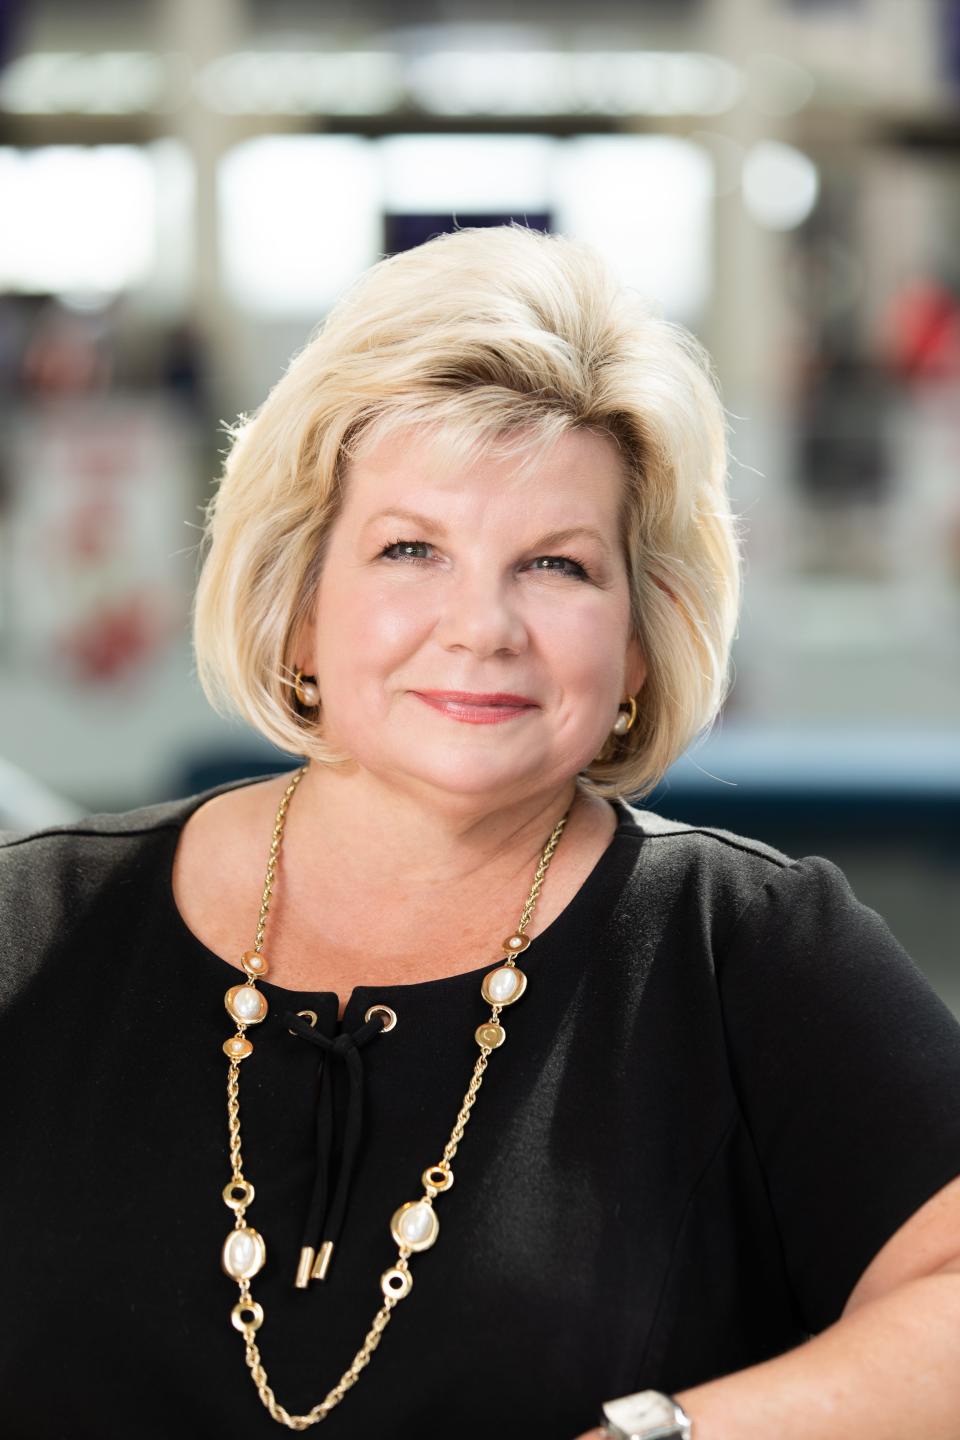 Candace McGraw, a 30-year veteran of the aviation industry, has been CVG's CEO since 2011. She was an Enquirer Woman of the Year in 2021.